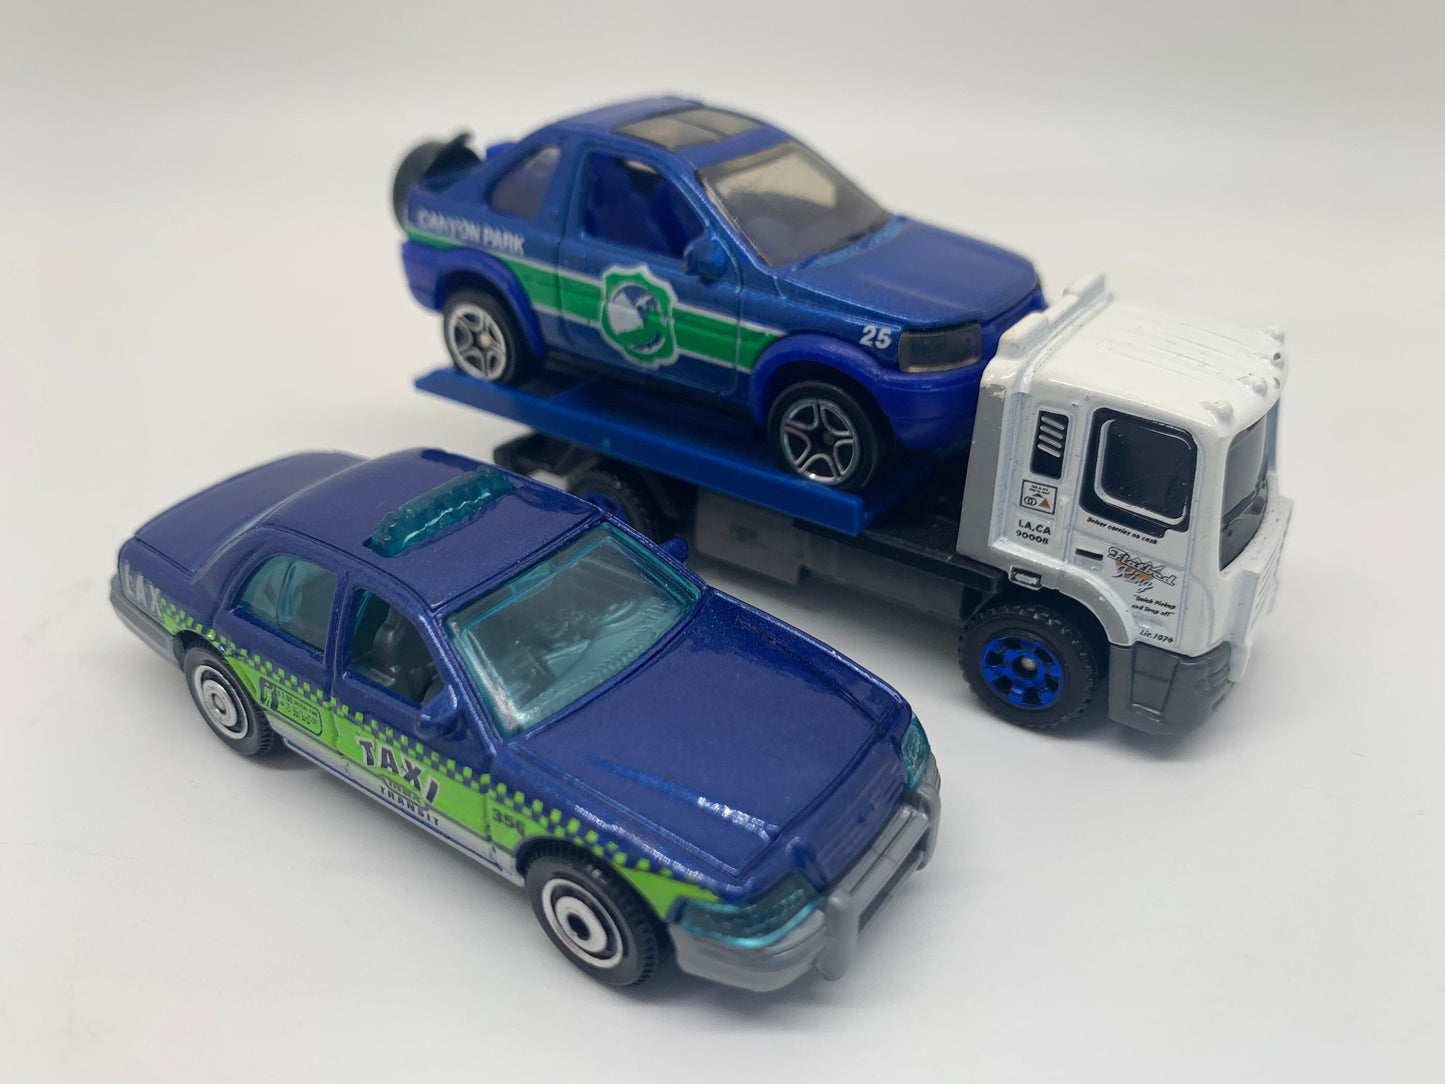 Matchbox Ford Crown Victoria Taxi Land Rover Freelander Blue Collectable Miniature Scale Model Toy Car Perfect Birthday Gift